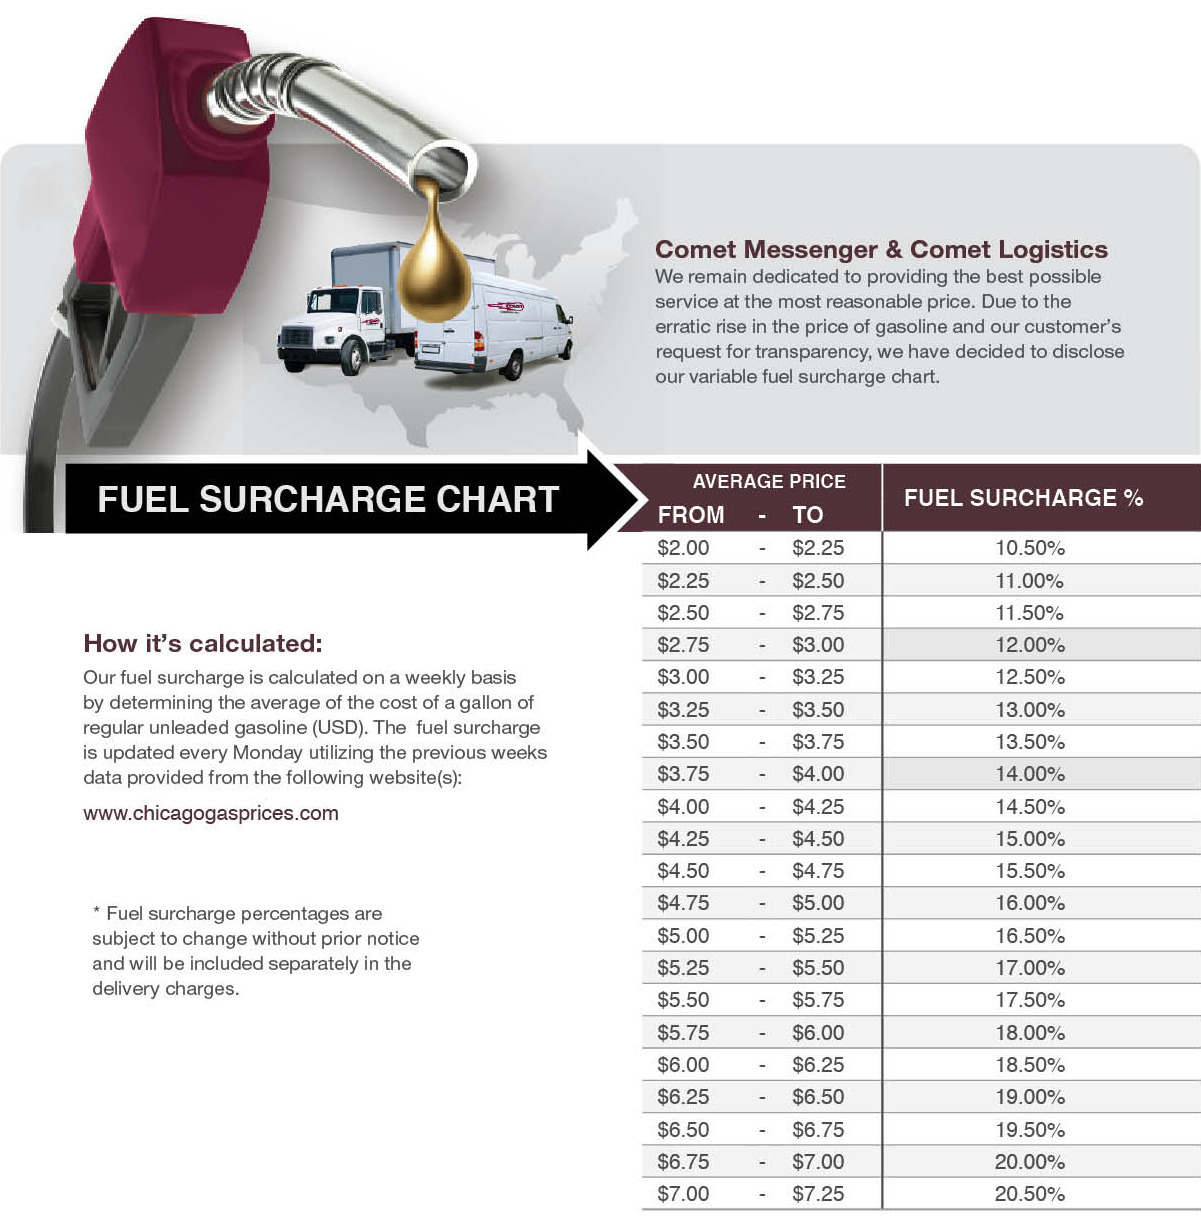 Fuel Surcharge Rate Chart